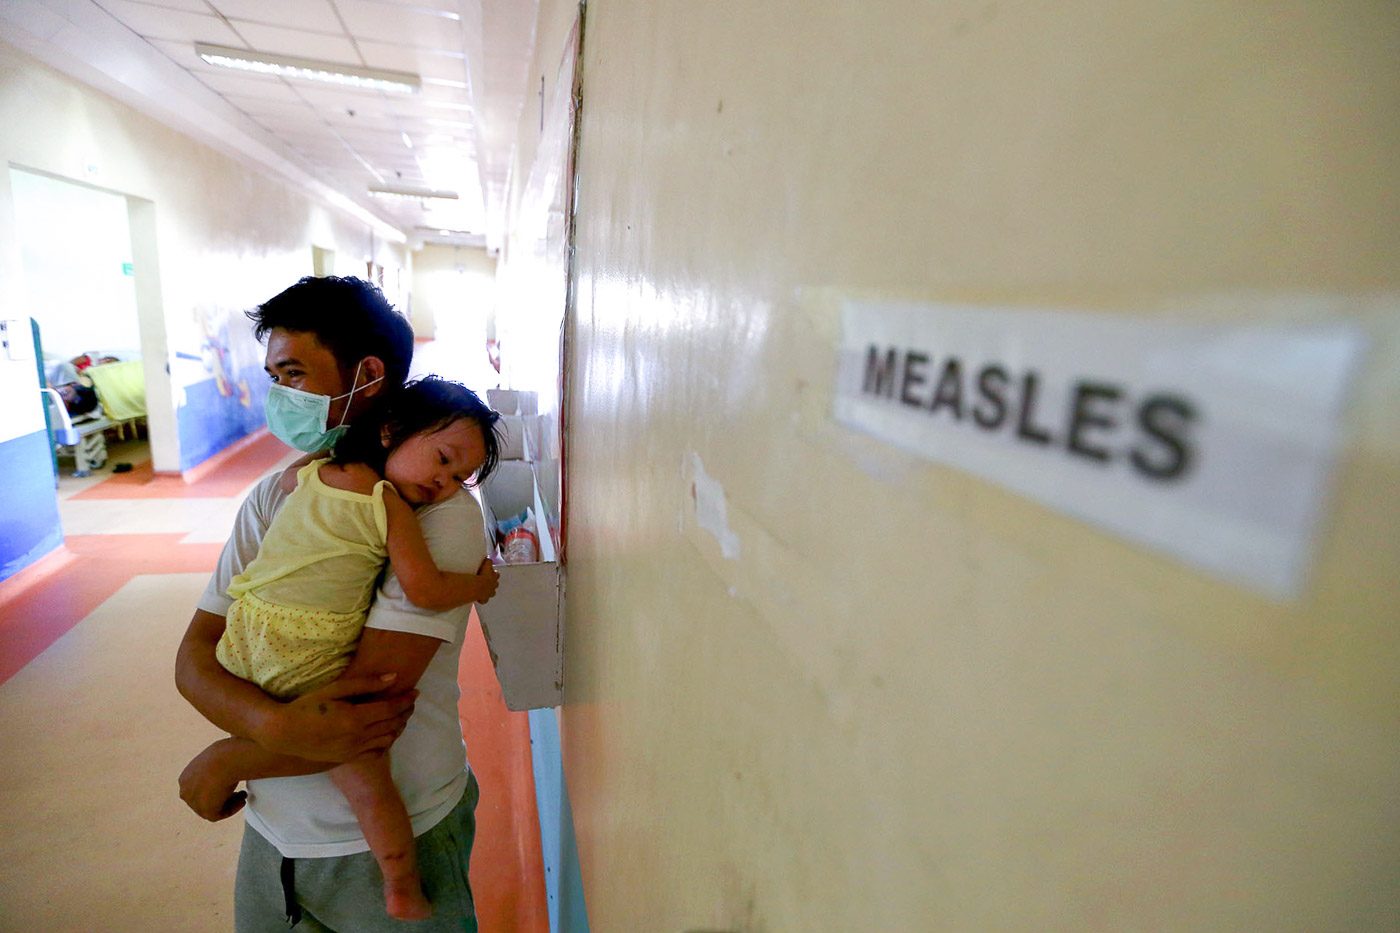 Measles: Nearly wiped-out, on the rise again